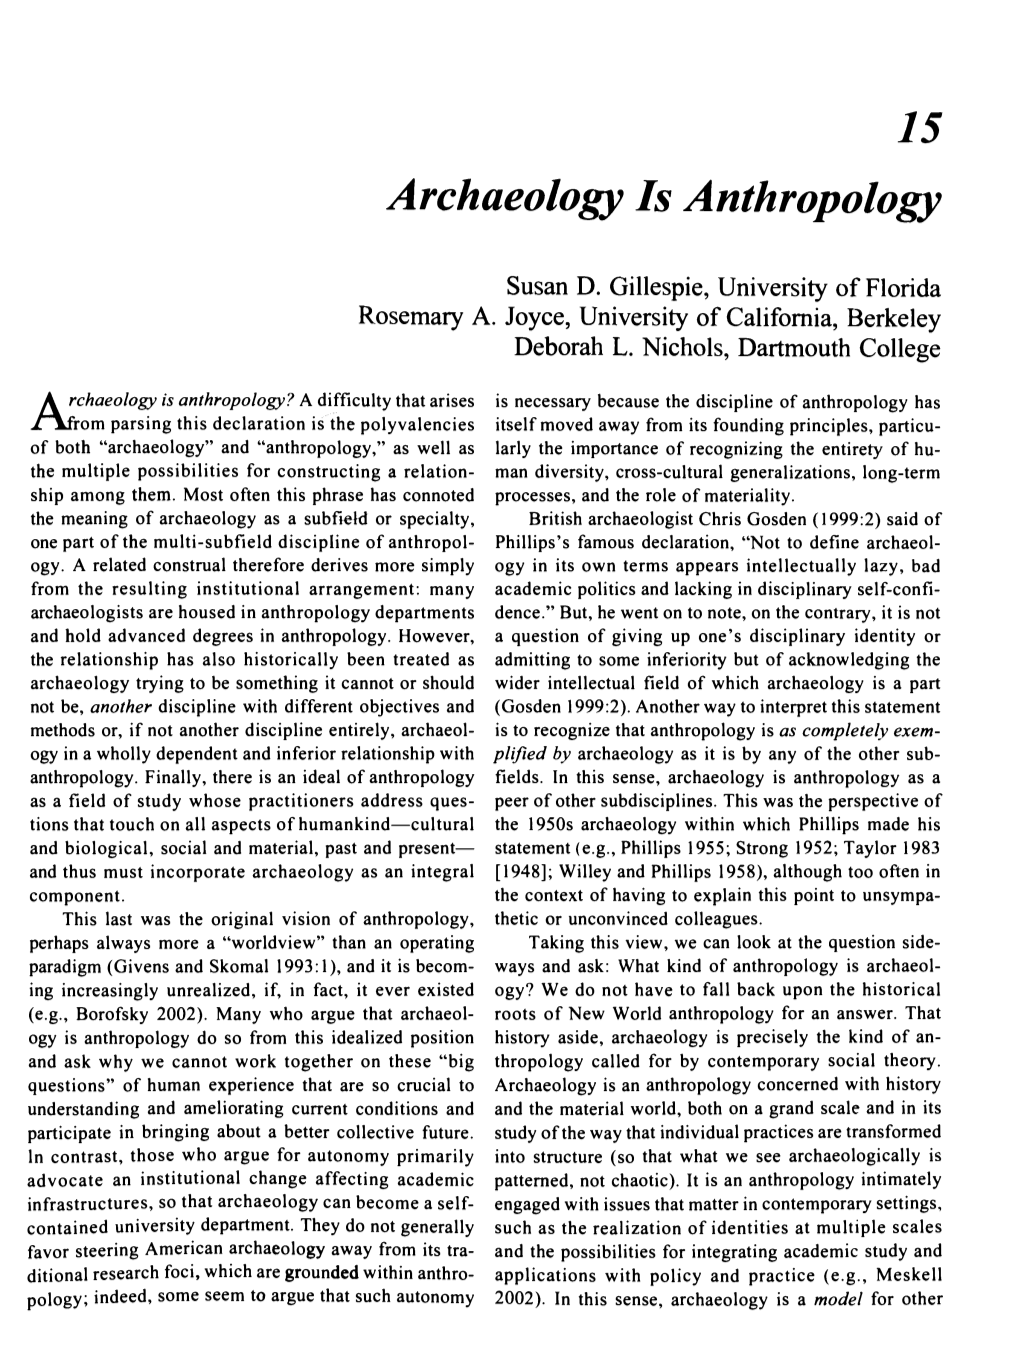 Chapter 15. Archaeology Is Anthropology